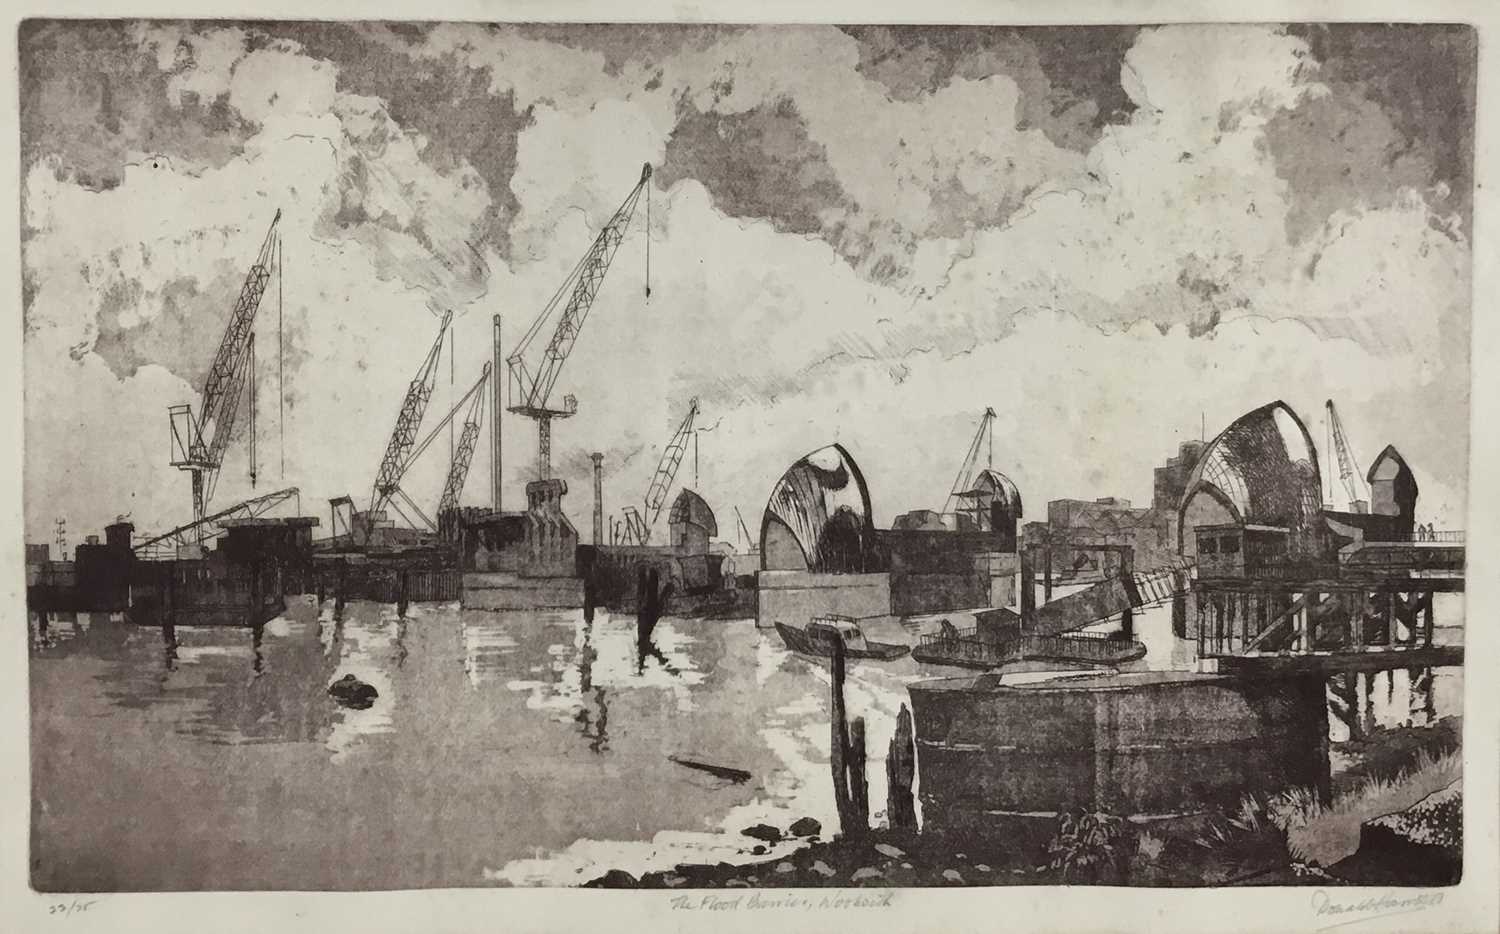 Lot 13 - Donald Harris, etching - The Flood Barrier Woolwich, signed in pencil and numbered 22/25, plate size 50cm x 30cm, framed 68.5cm x 49cm